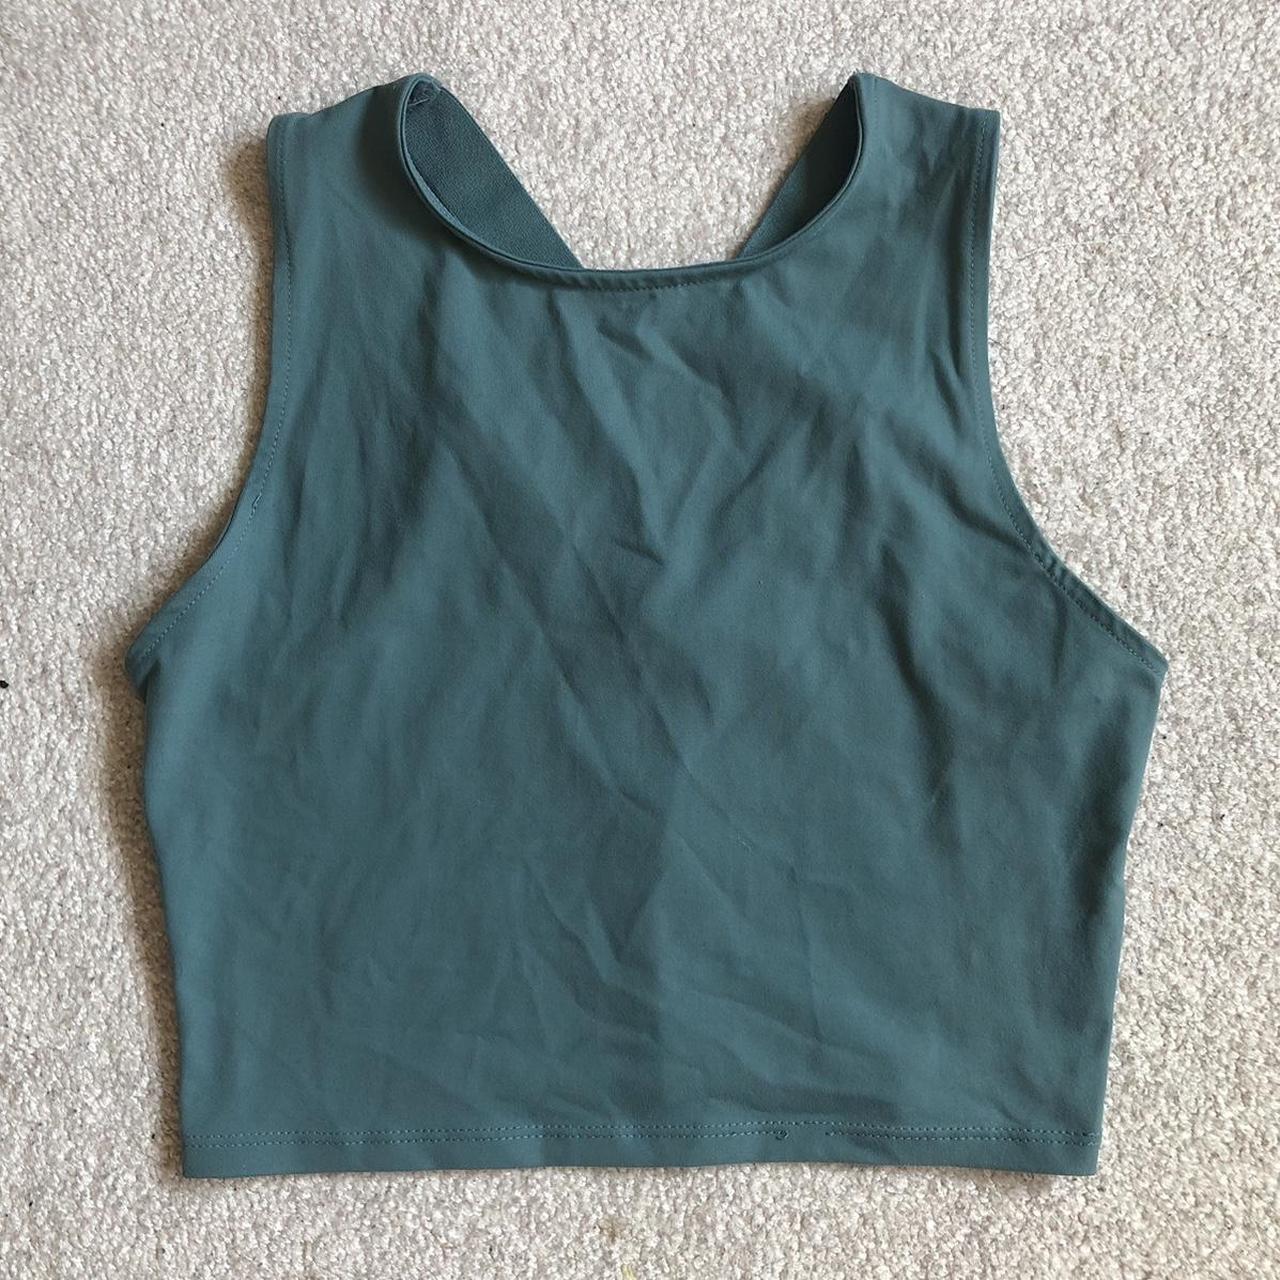 forever 21 sports top! like new - no flaws or... - Depop